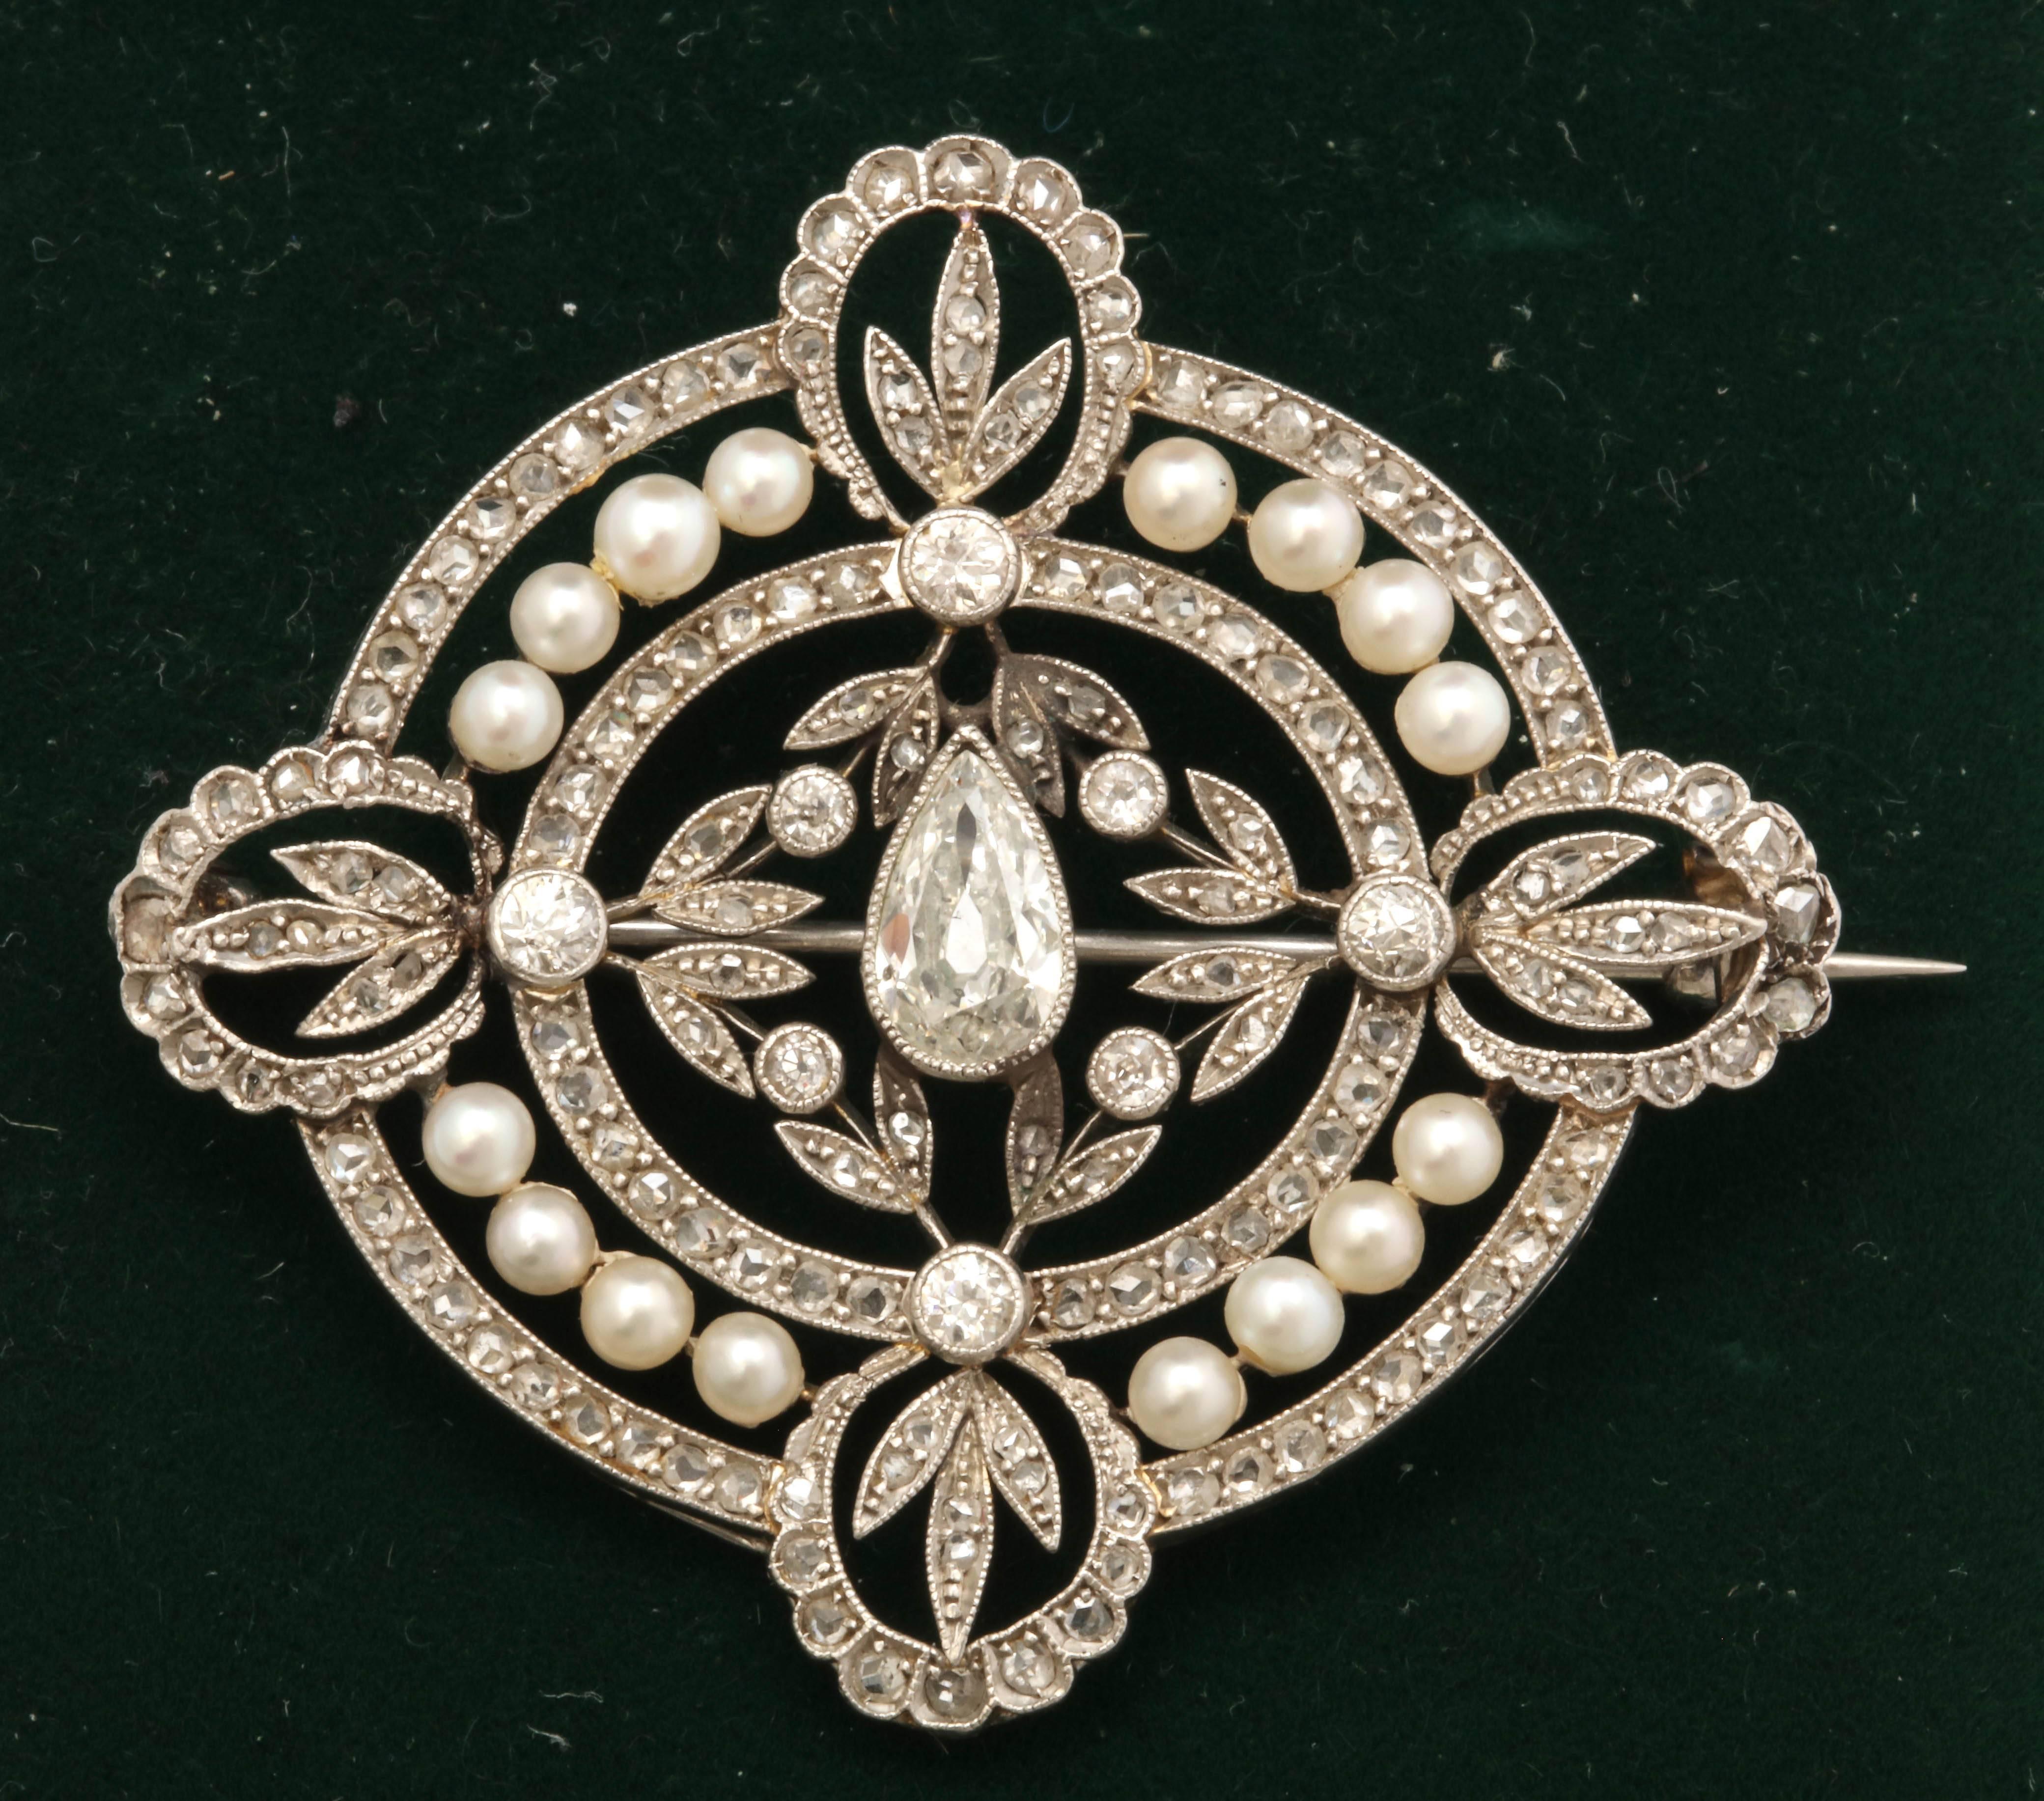 One Ladies Open Work Brooch From The Edwardian Era Decorated With Numerous Antique Cut Diamonds With A Center Pear Shaped diamond Approximately Measuring .80Cts and Numerous Antique Cut Diamonds Weighing Approximately 2 Carats. Further Designed With